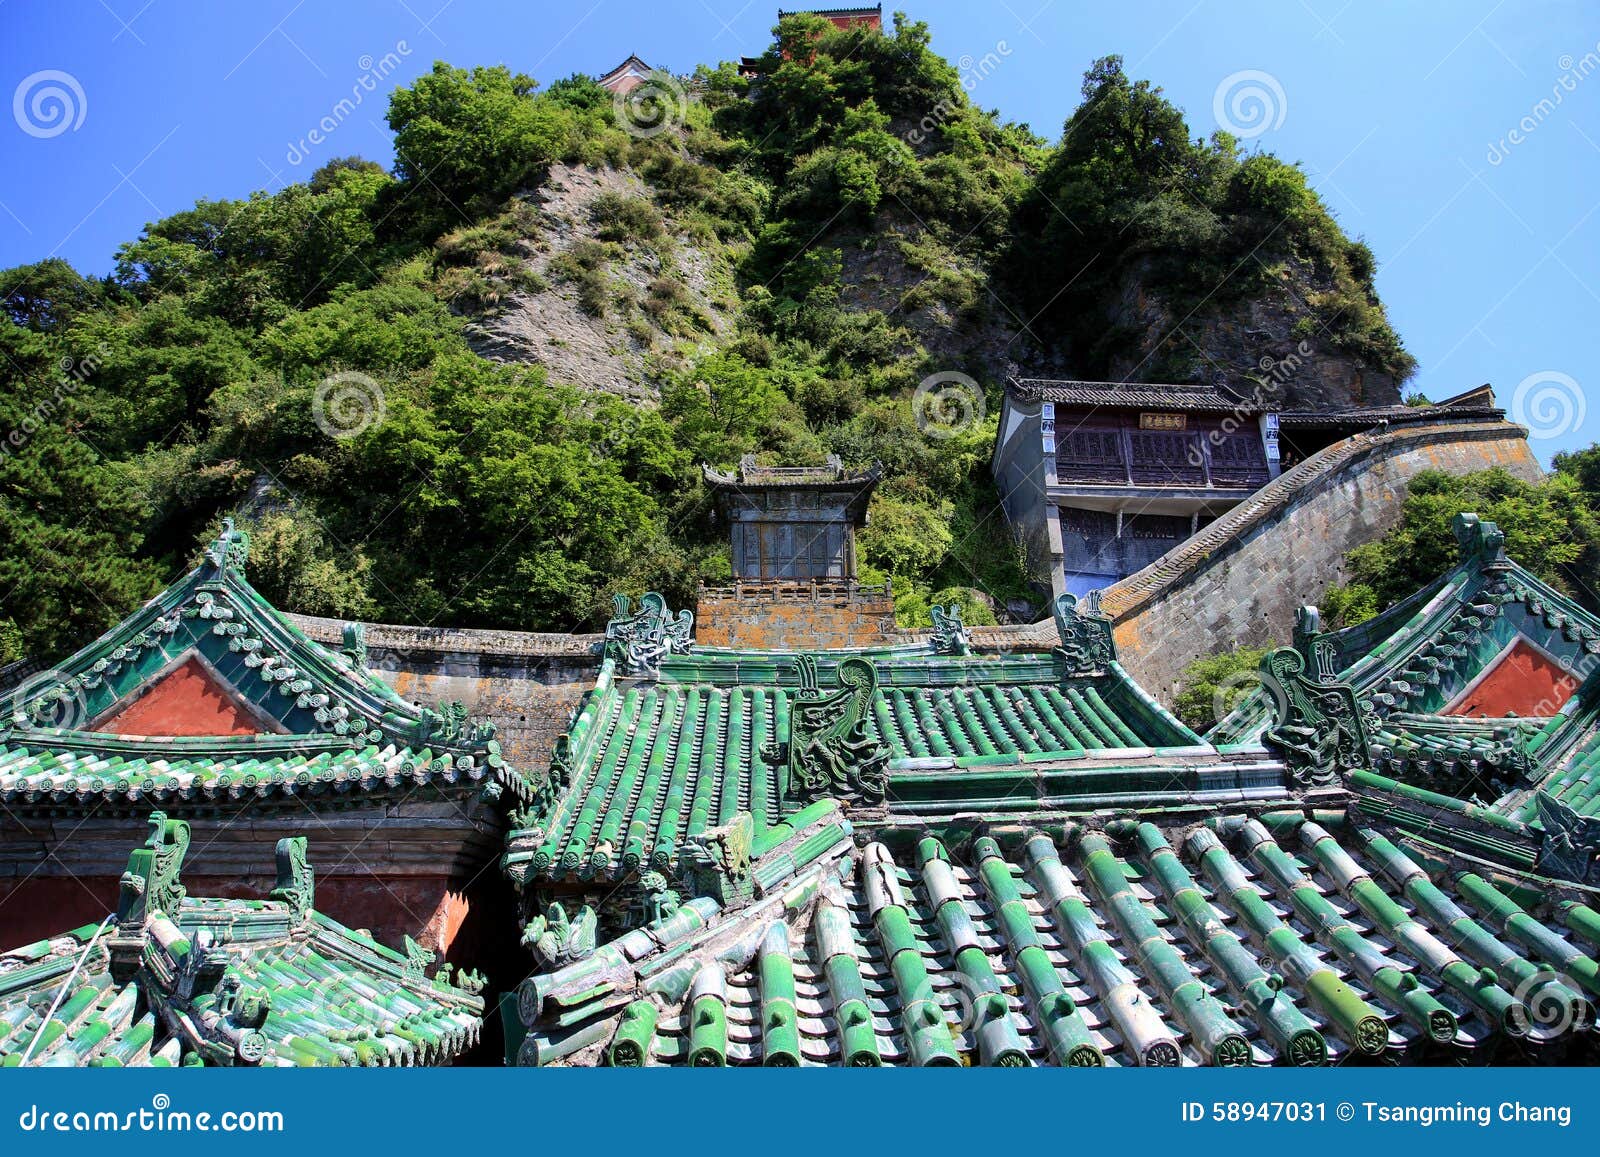 wudang mountain , a famous taoist holy land in china